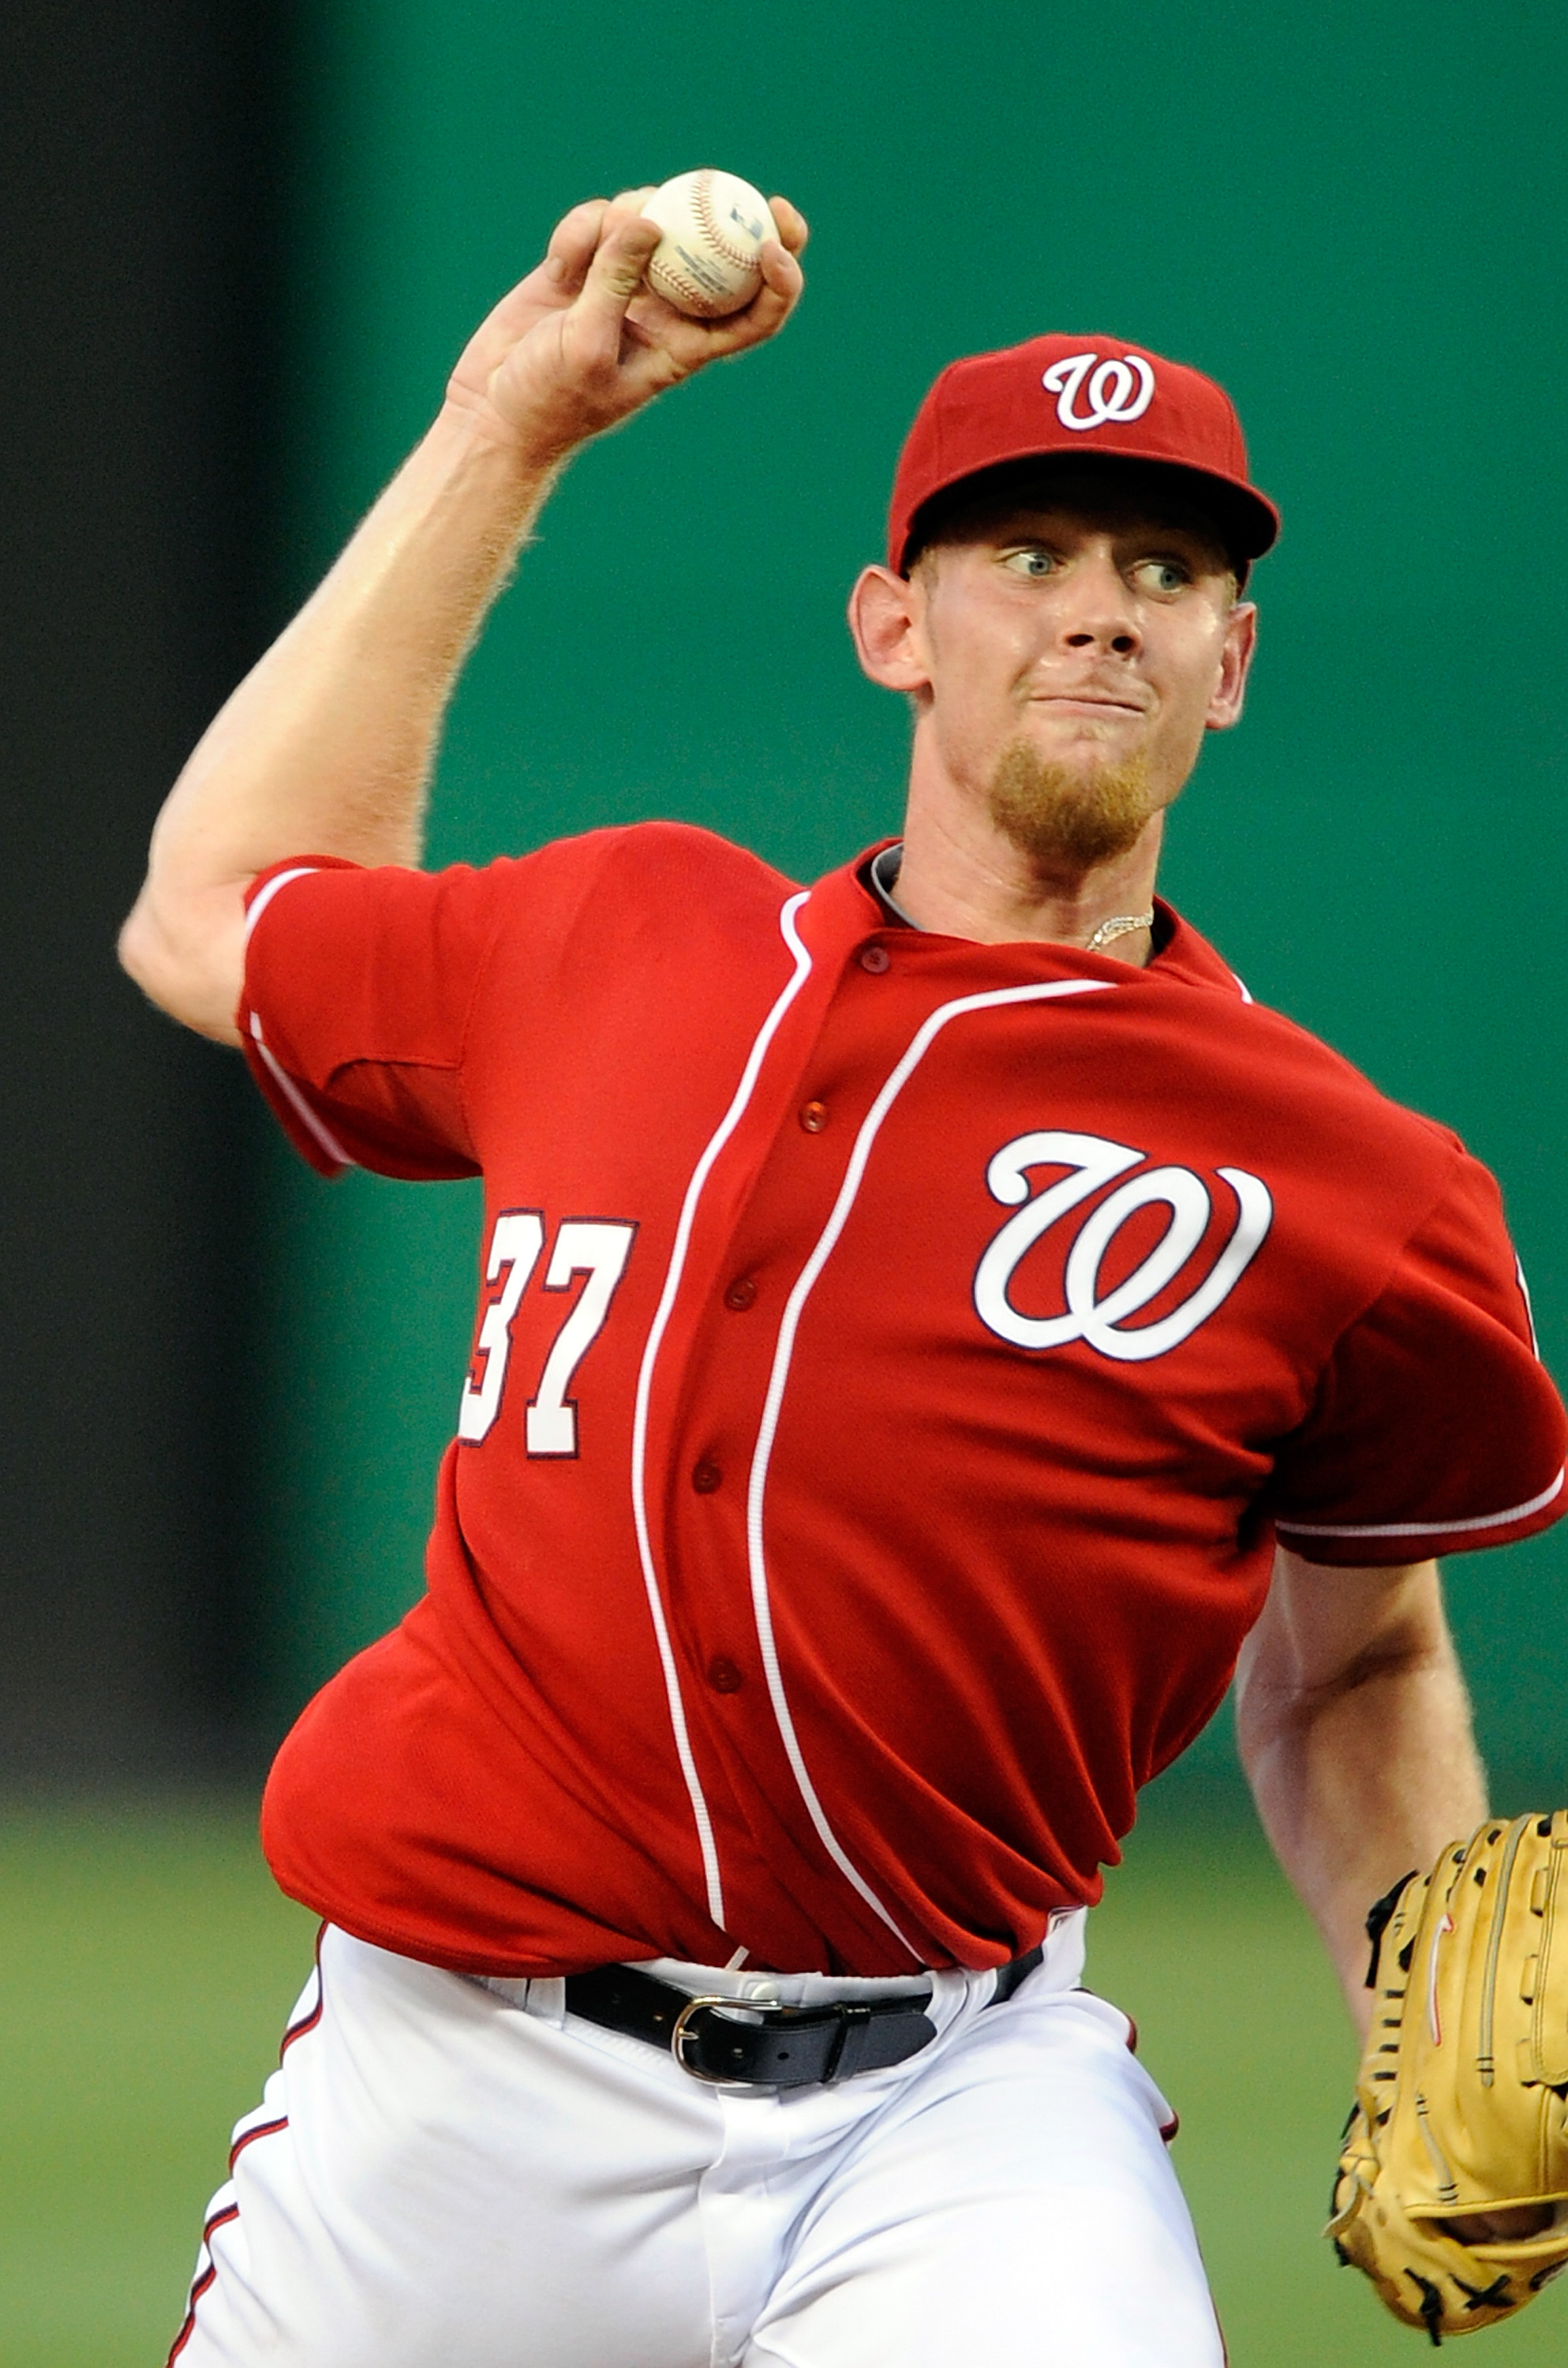 WASHINGTON - JULY 09:  Stephen Strasburg #37 of the Washington Nationals pitches against the San Francisco Giants at Nationals Park on July 9, 2010 in Washington, DC.  (Photo by Greg Fiume/Getty Images)